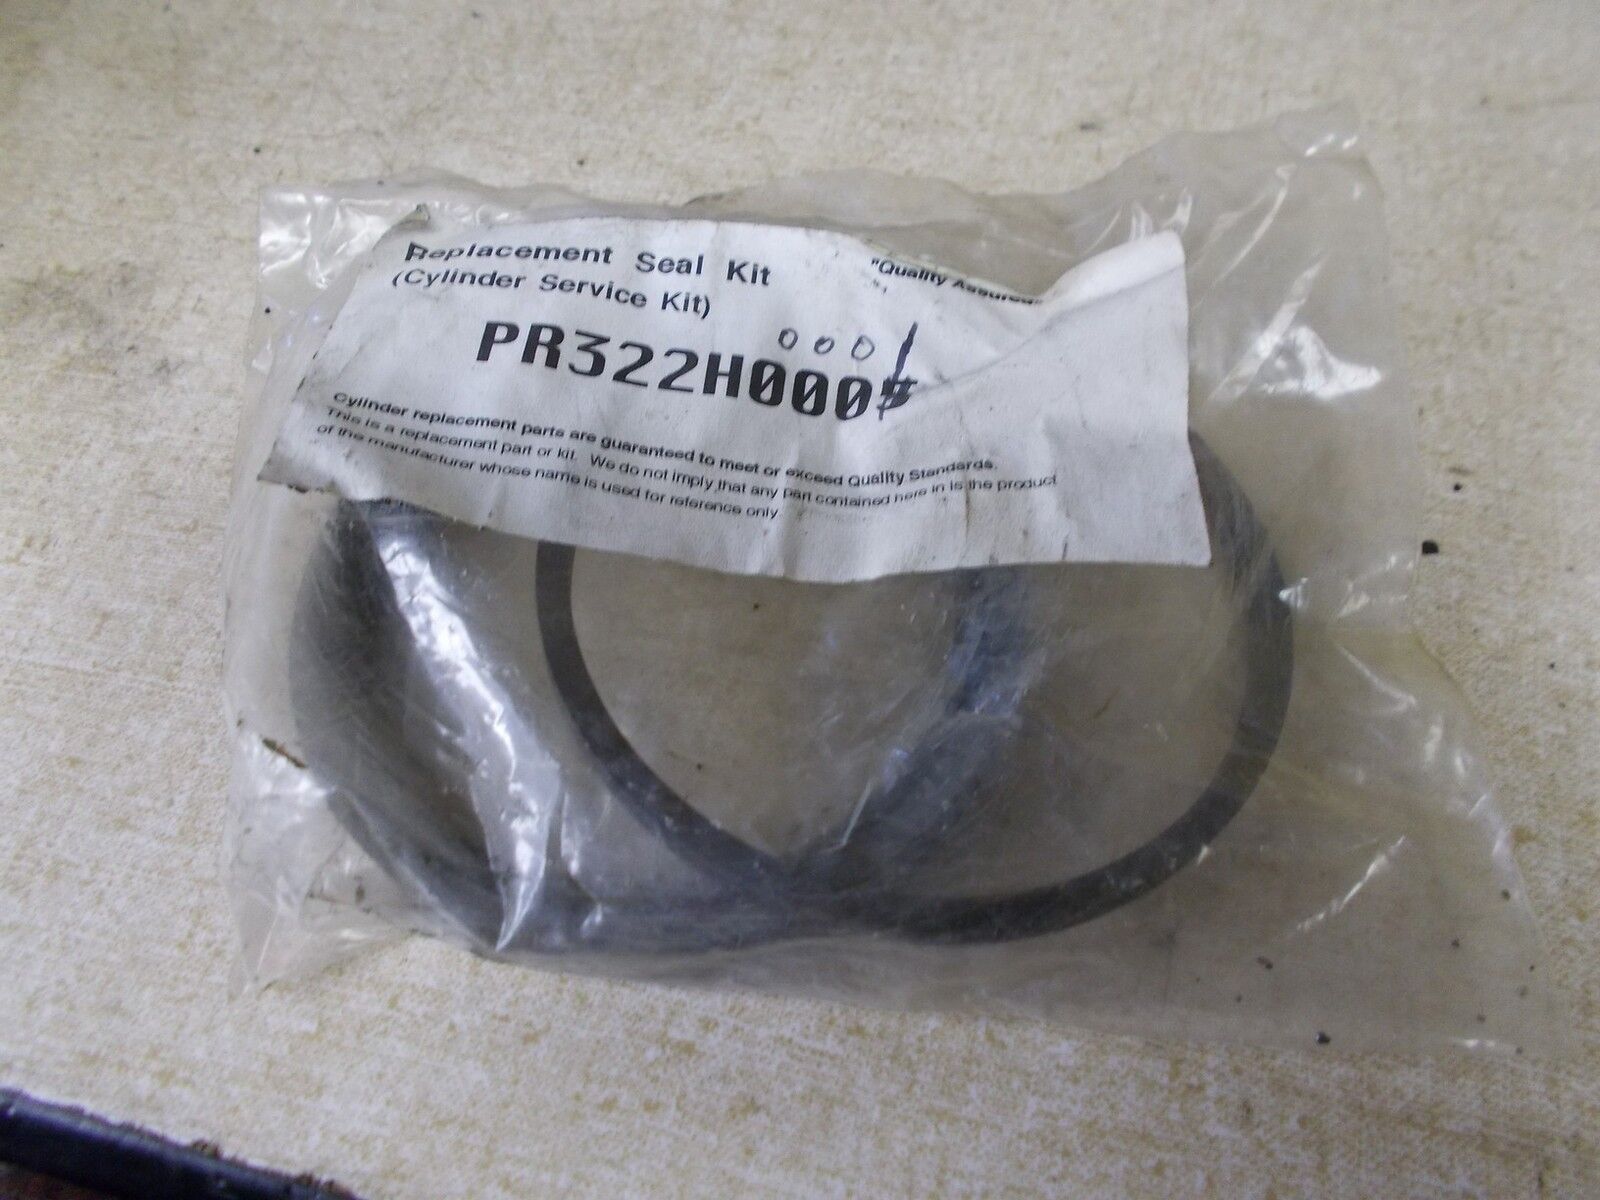 NEW Parker, Replacement Piston Seal Kit Cylinder Service PR322H0005 *FREE SHIP*